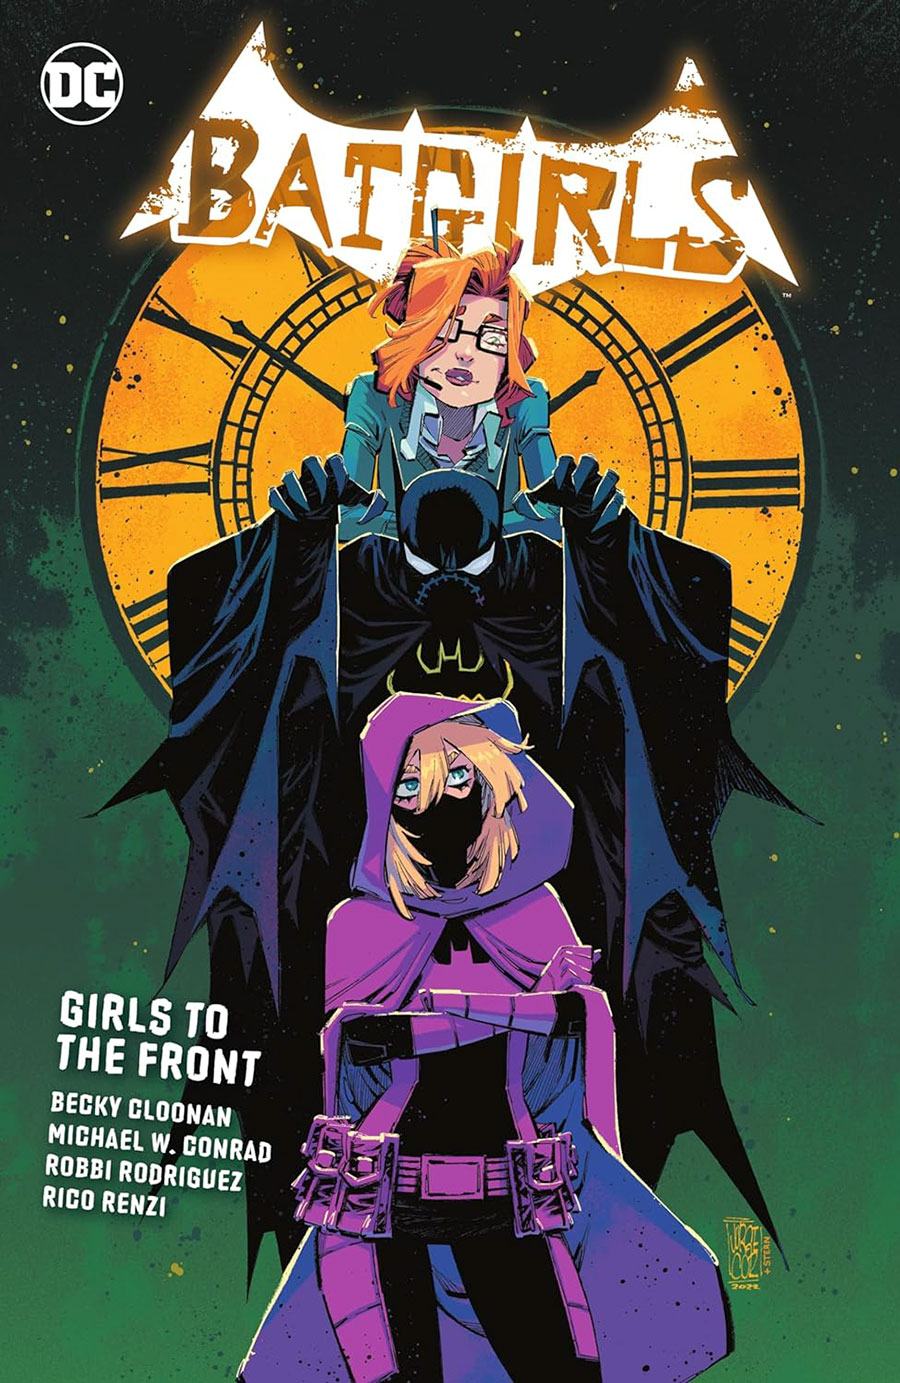 Batgirls Vol 3 Girls To The Front TP